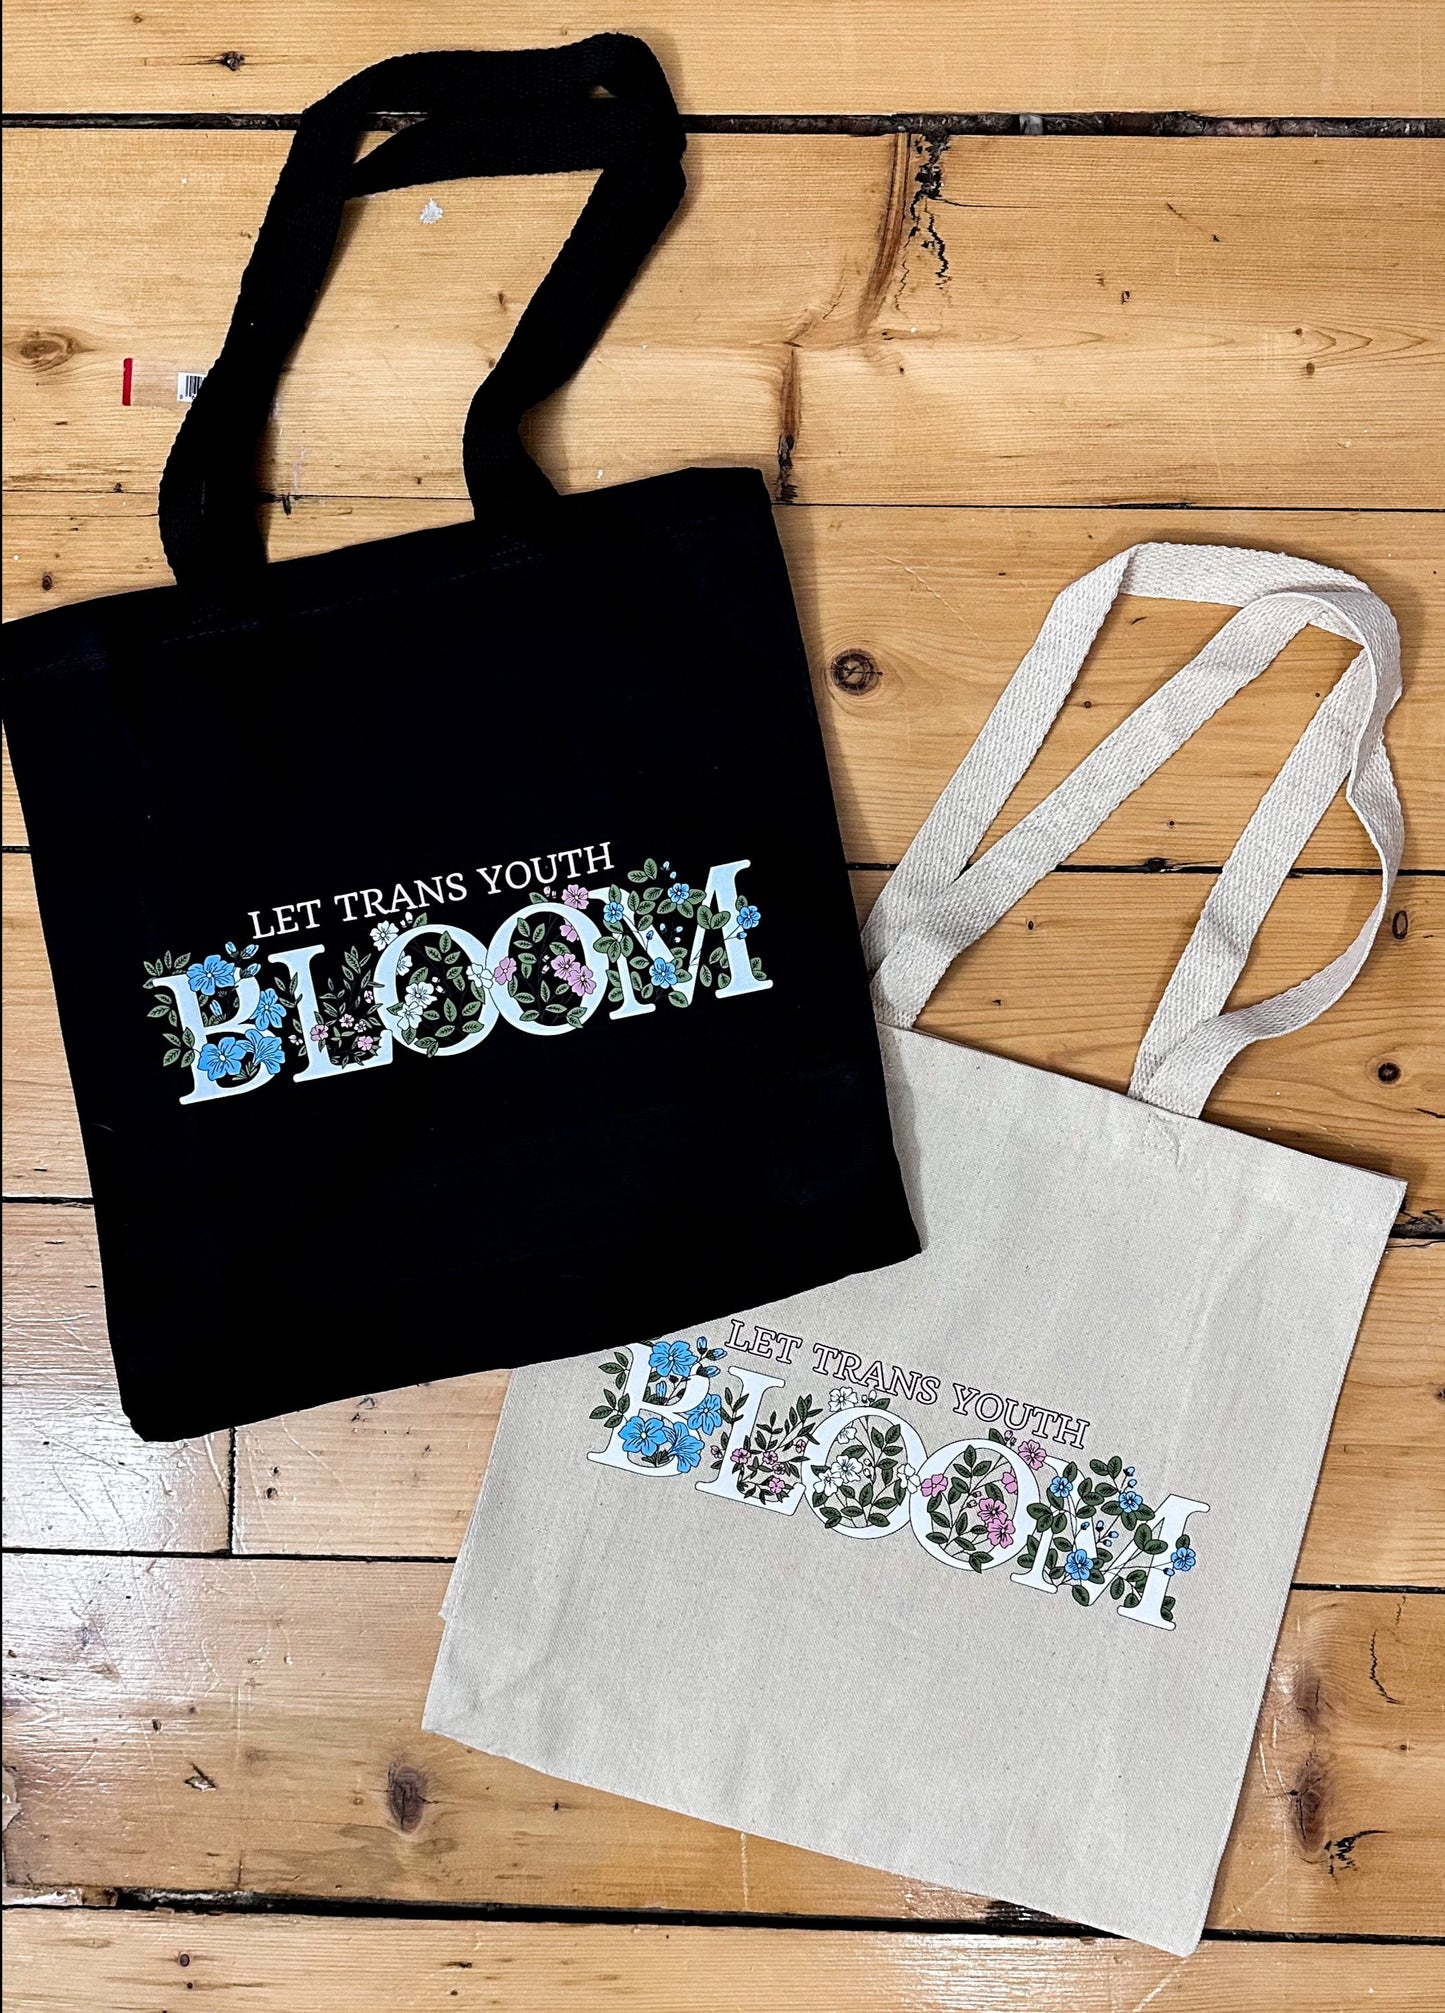 Let Trans Youth Bloom Canvas Tote Bag